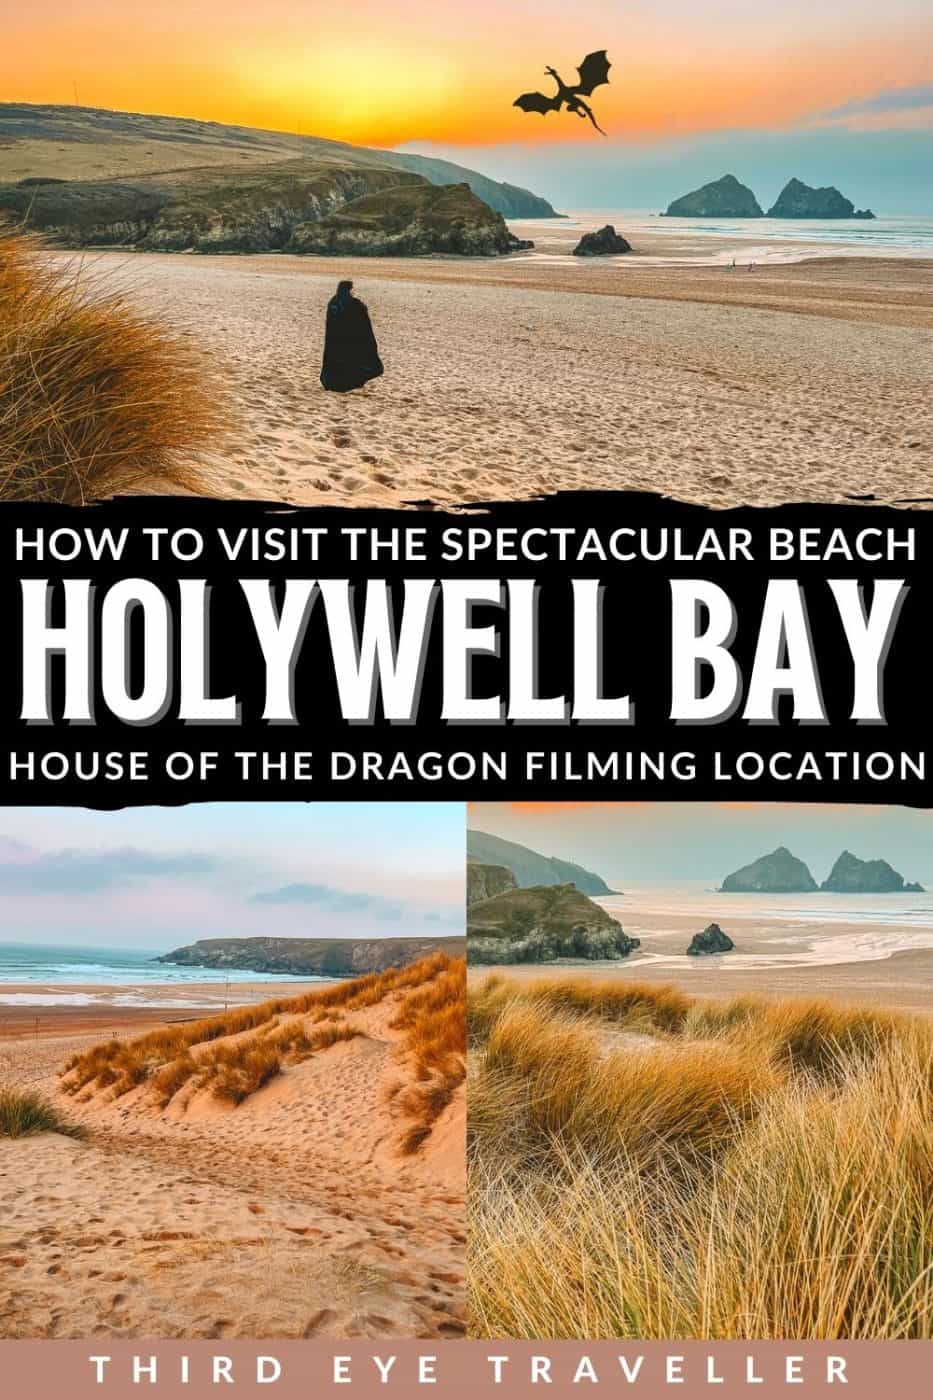 Holywell Bay House of the Dragon filming location